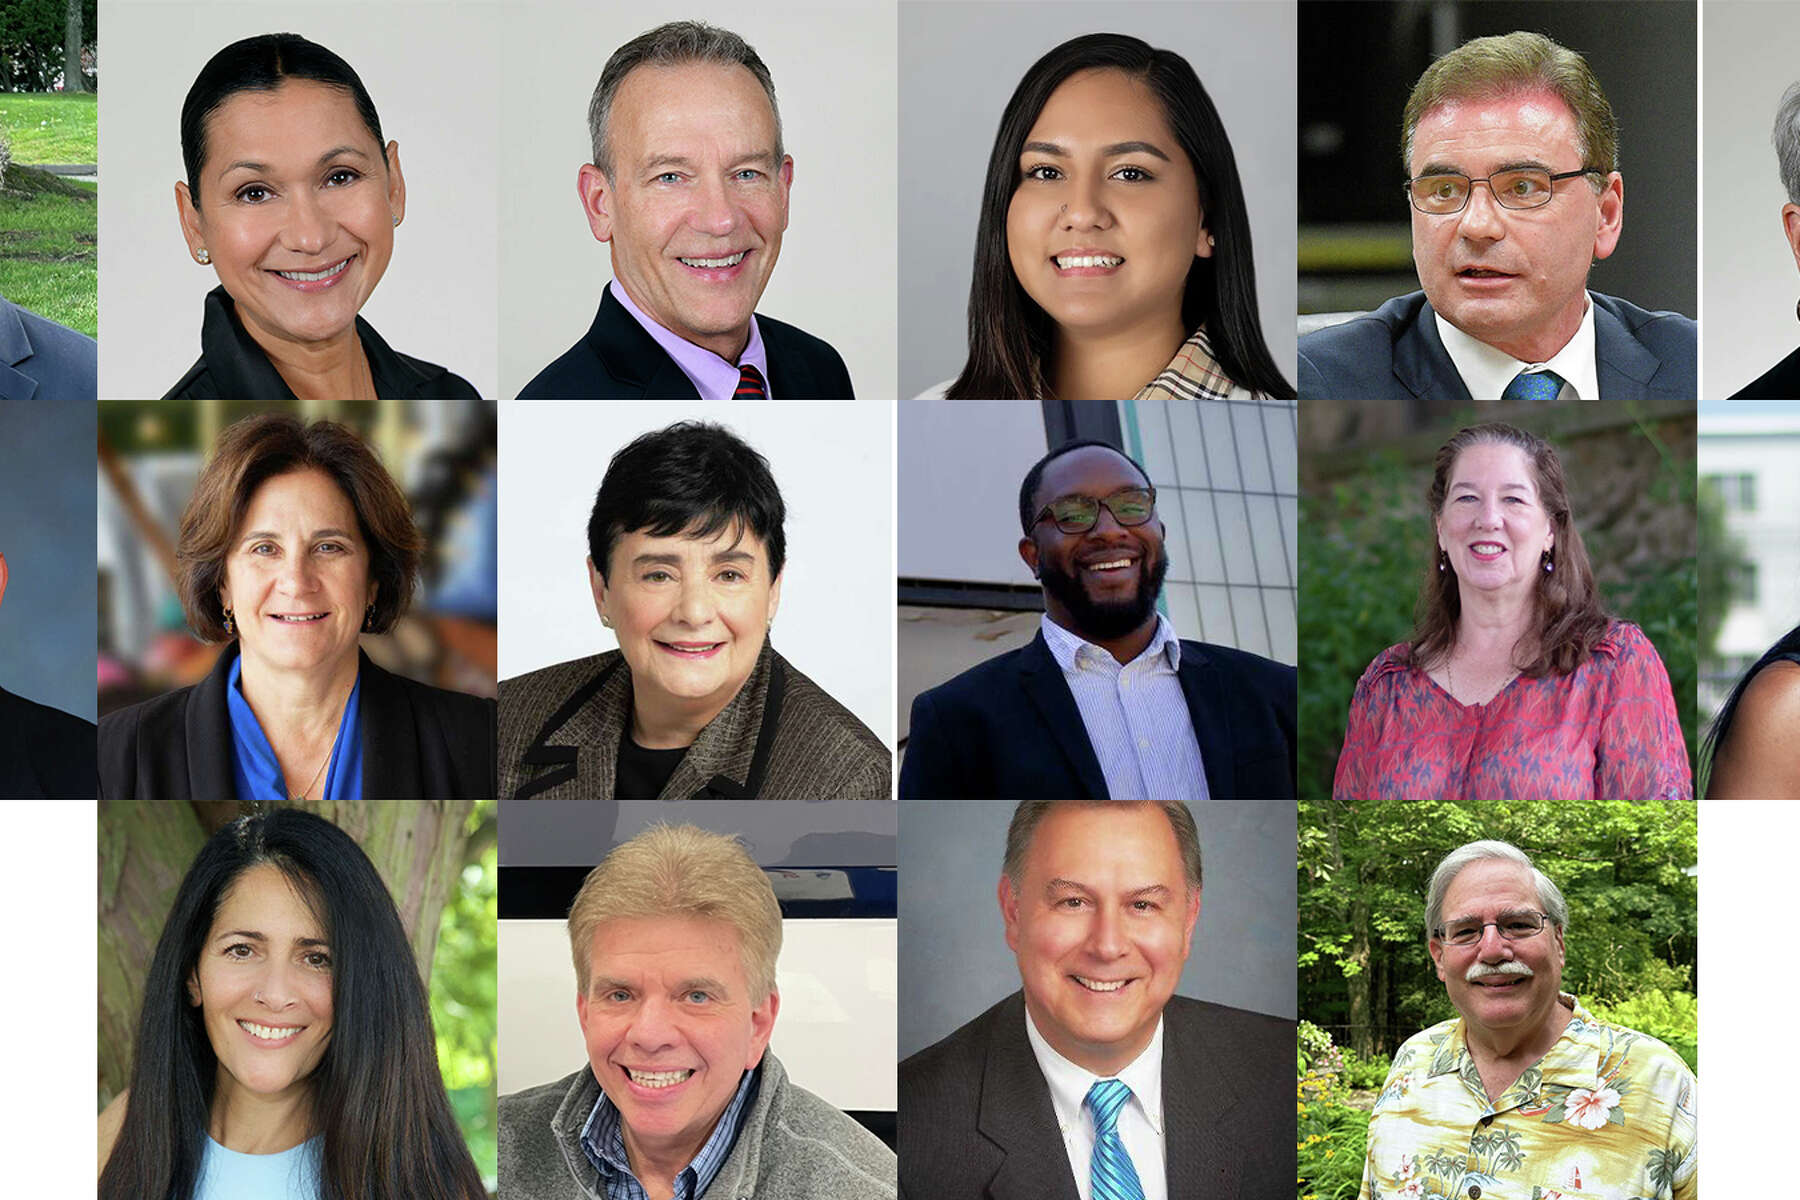 Stamford election guide 2023: Meet the candidates and how to vote